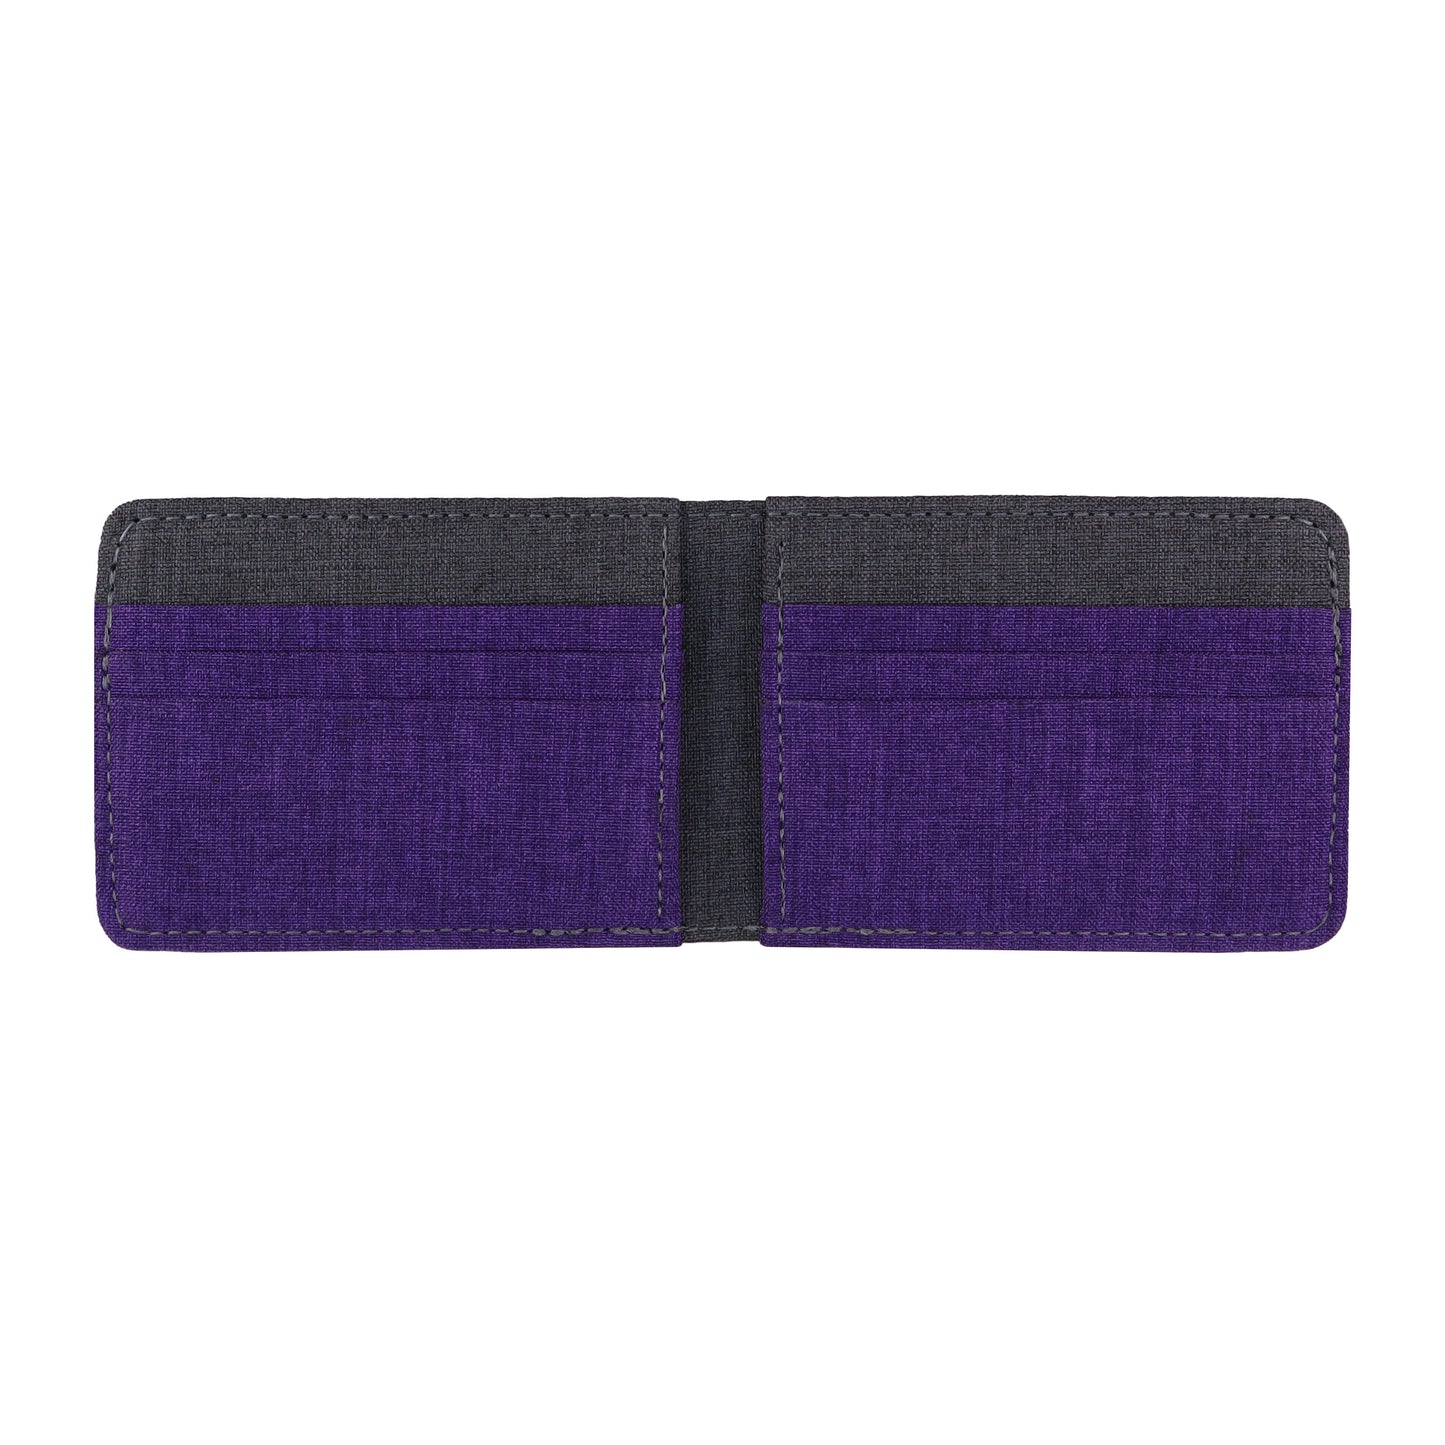 Purple and Gray Fabric Bifold Wallet